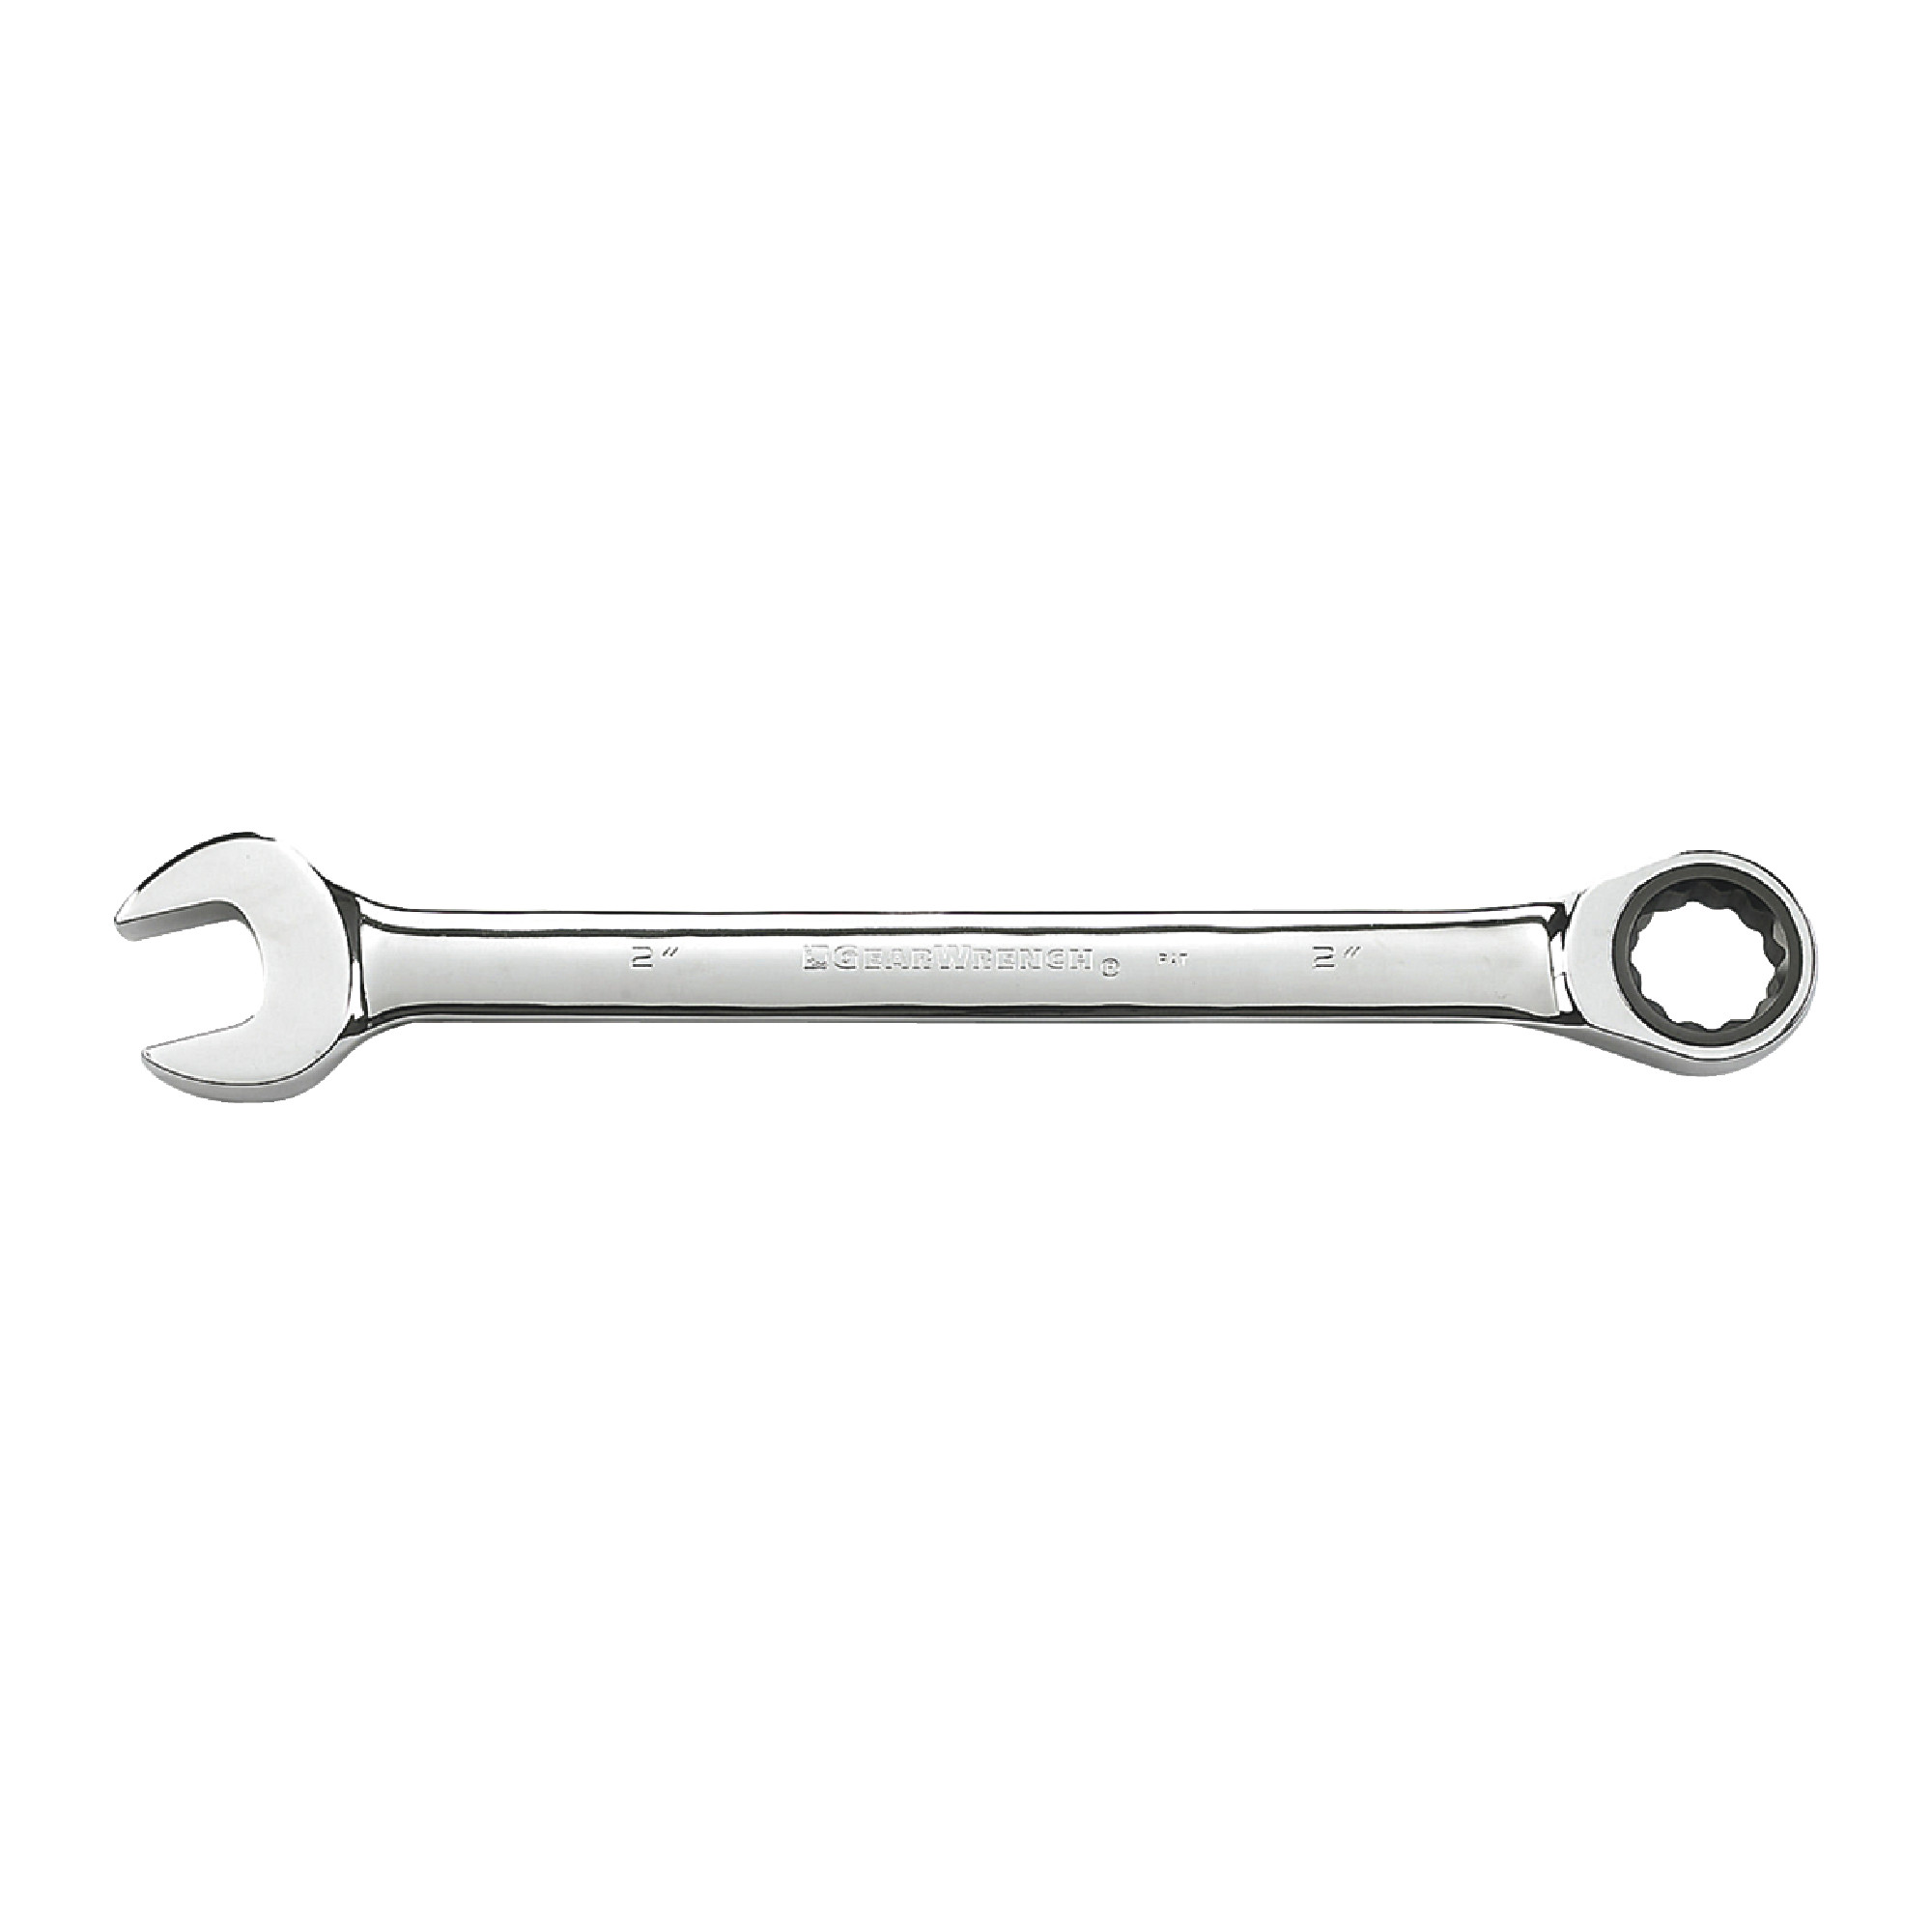 1-7/16" 12 Point Jumbo Ratcheting Combination Wrench